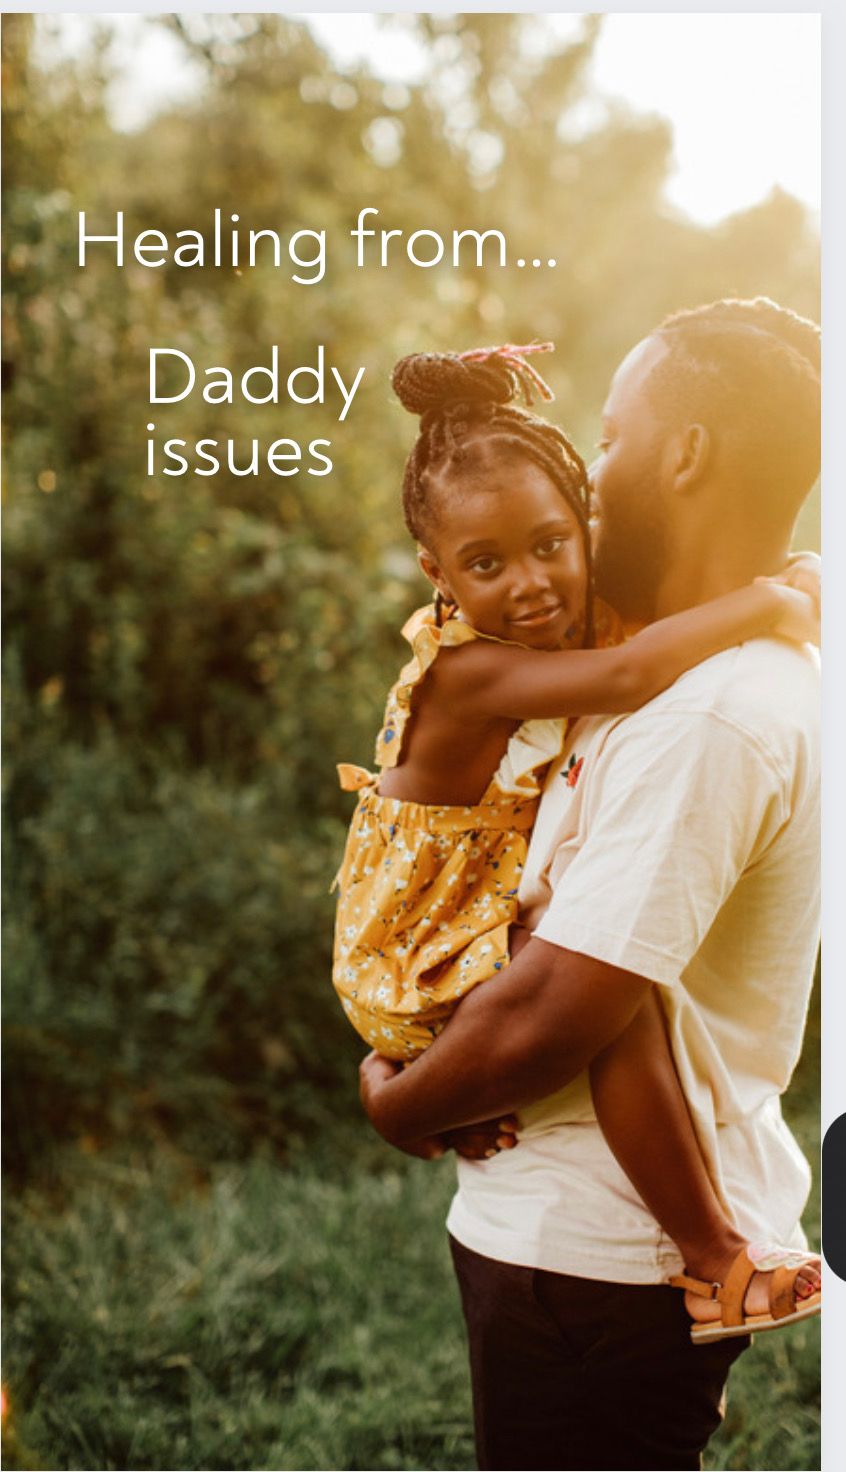 Daddy Issues: Healing childhood trauma to encourage healthy relationships